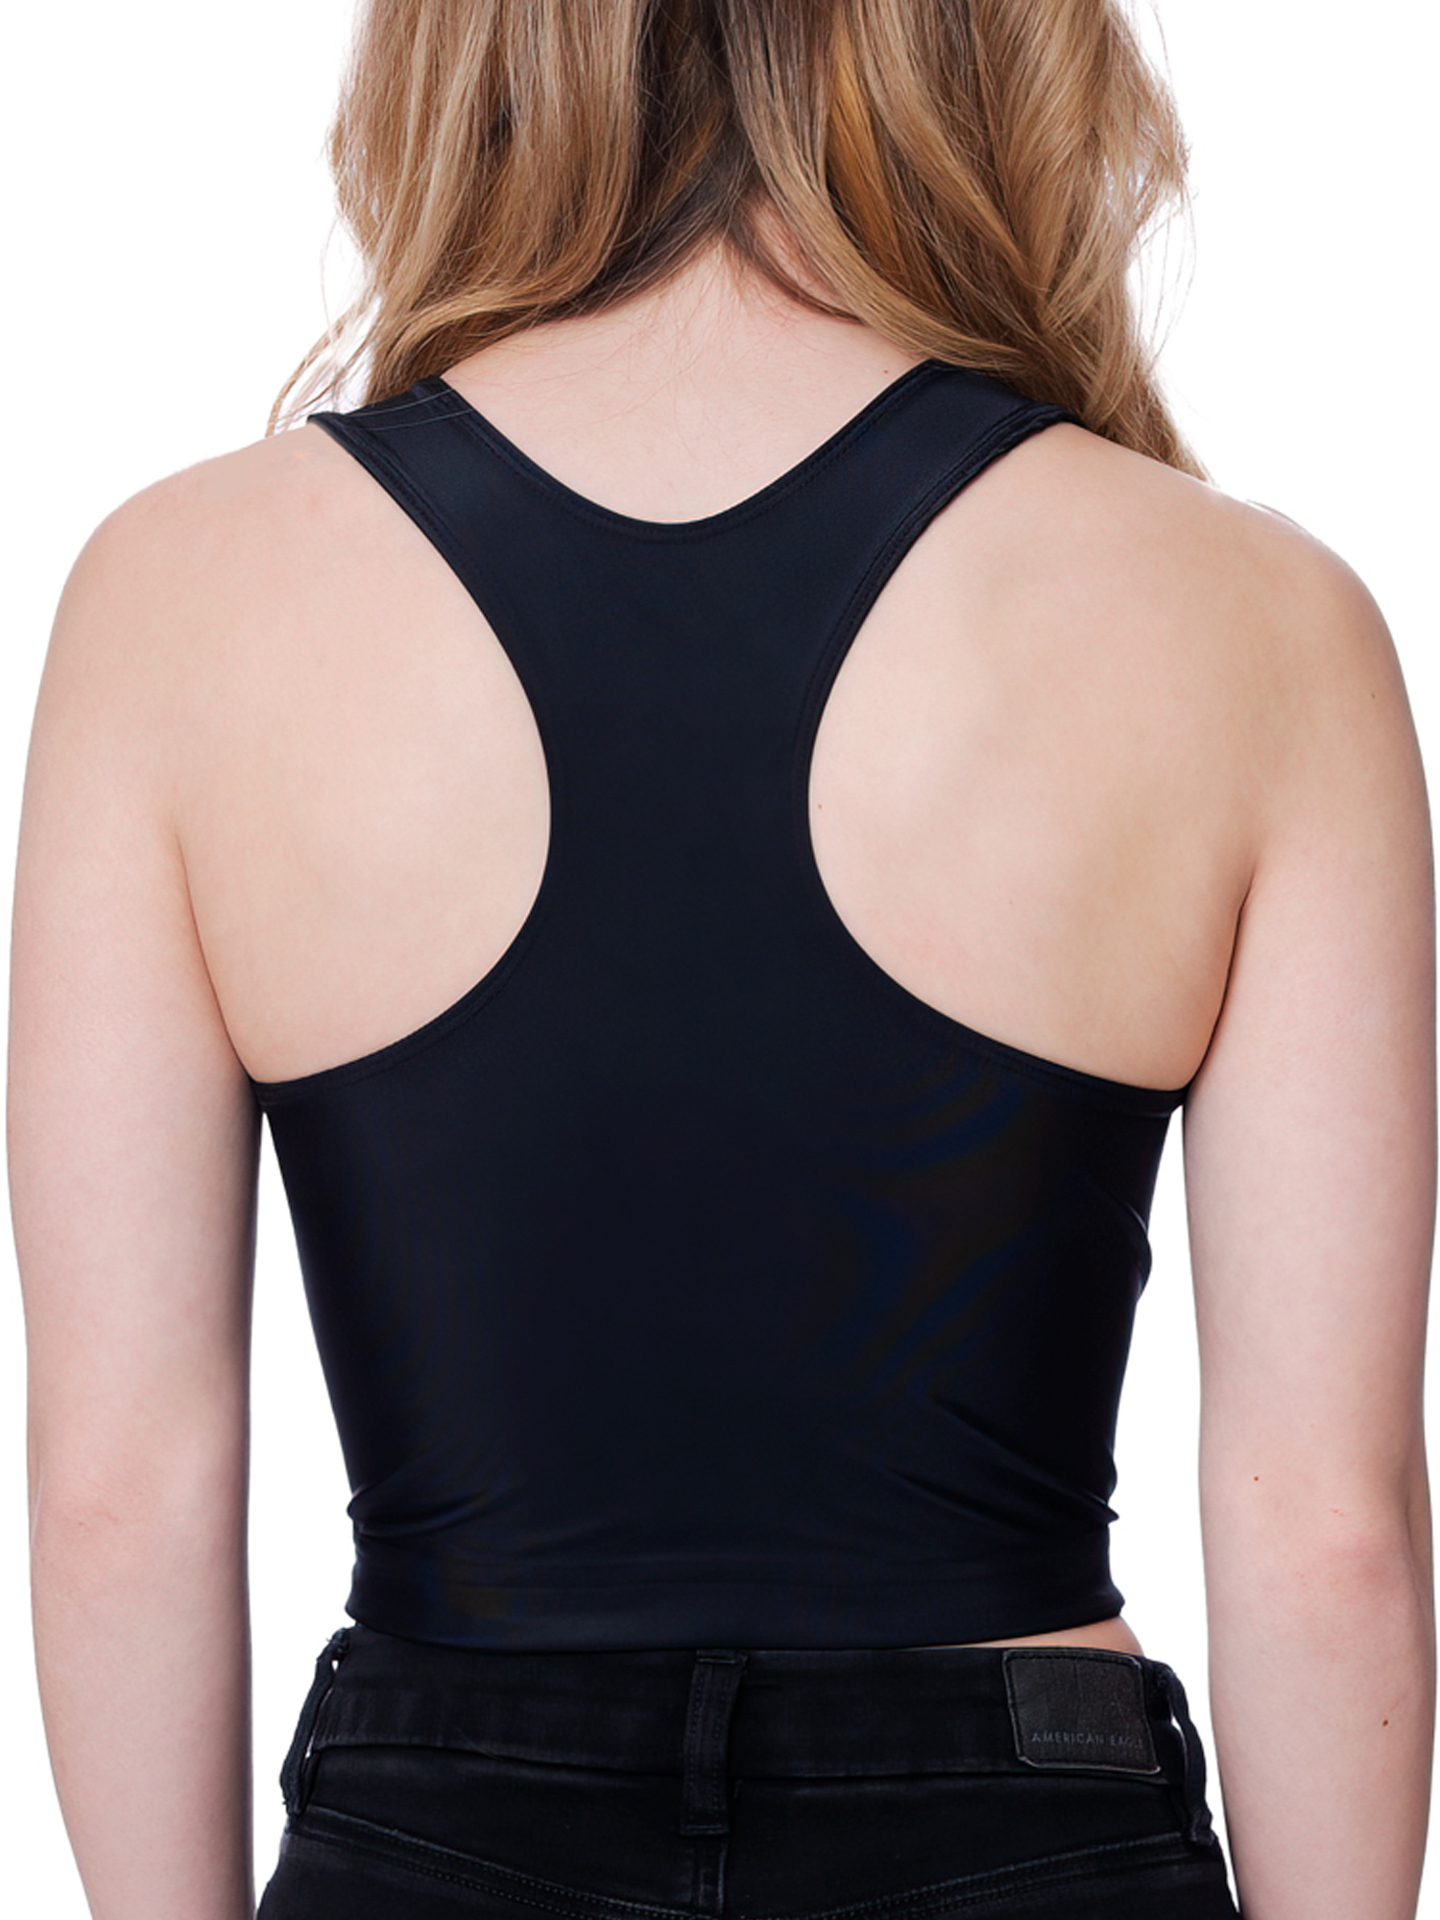 https://www.underworks.com/images/thumbs/0002216_womens-firm-compression-racerback-crop-top-chest-binder-and-minimizer.jpeg